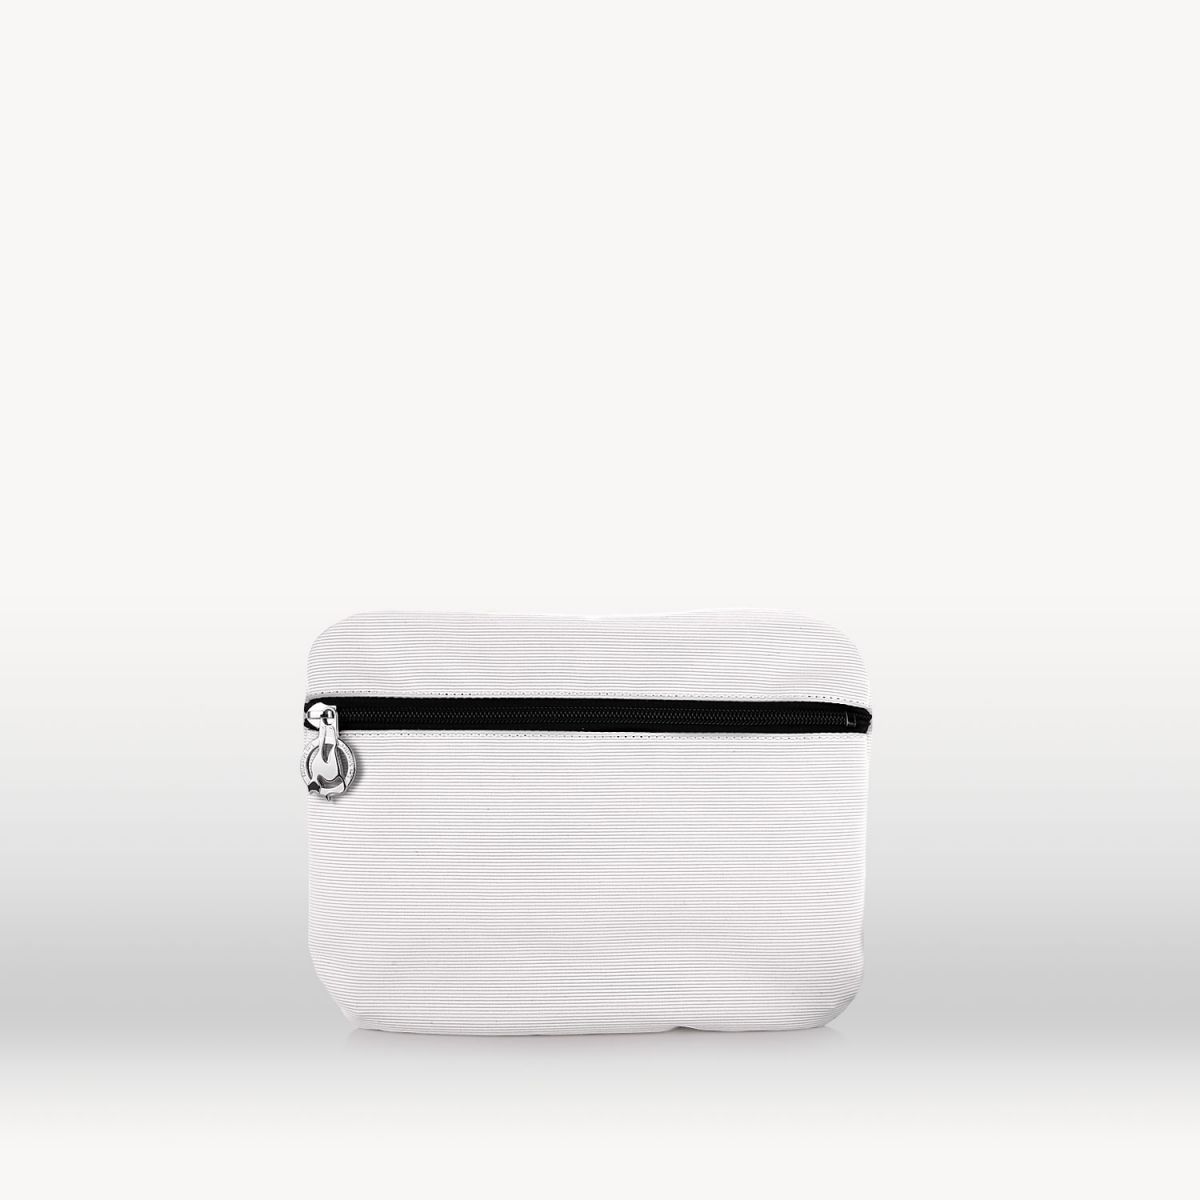 Additional pouch White flutted canvas